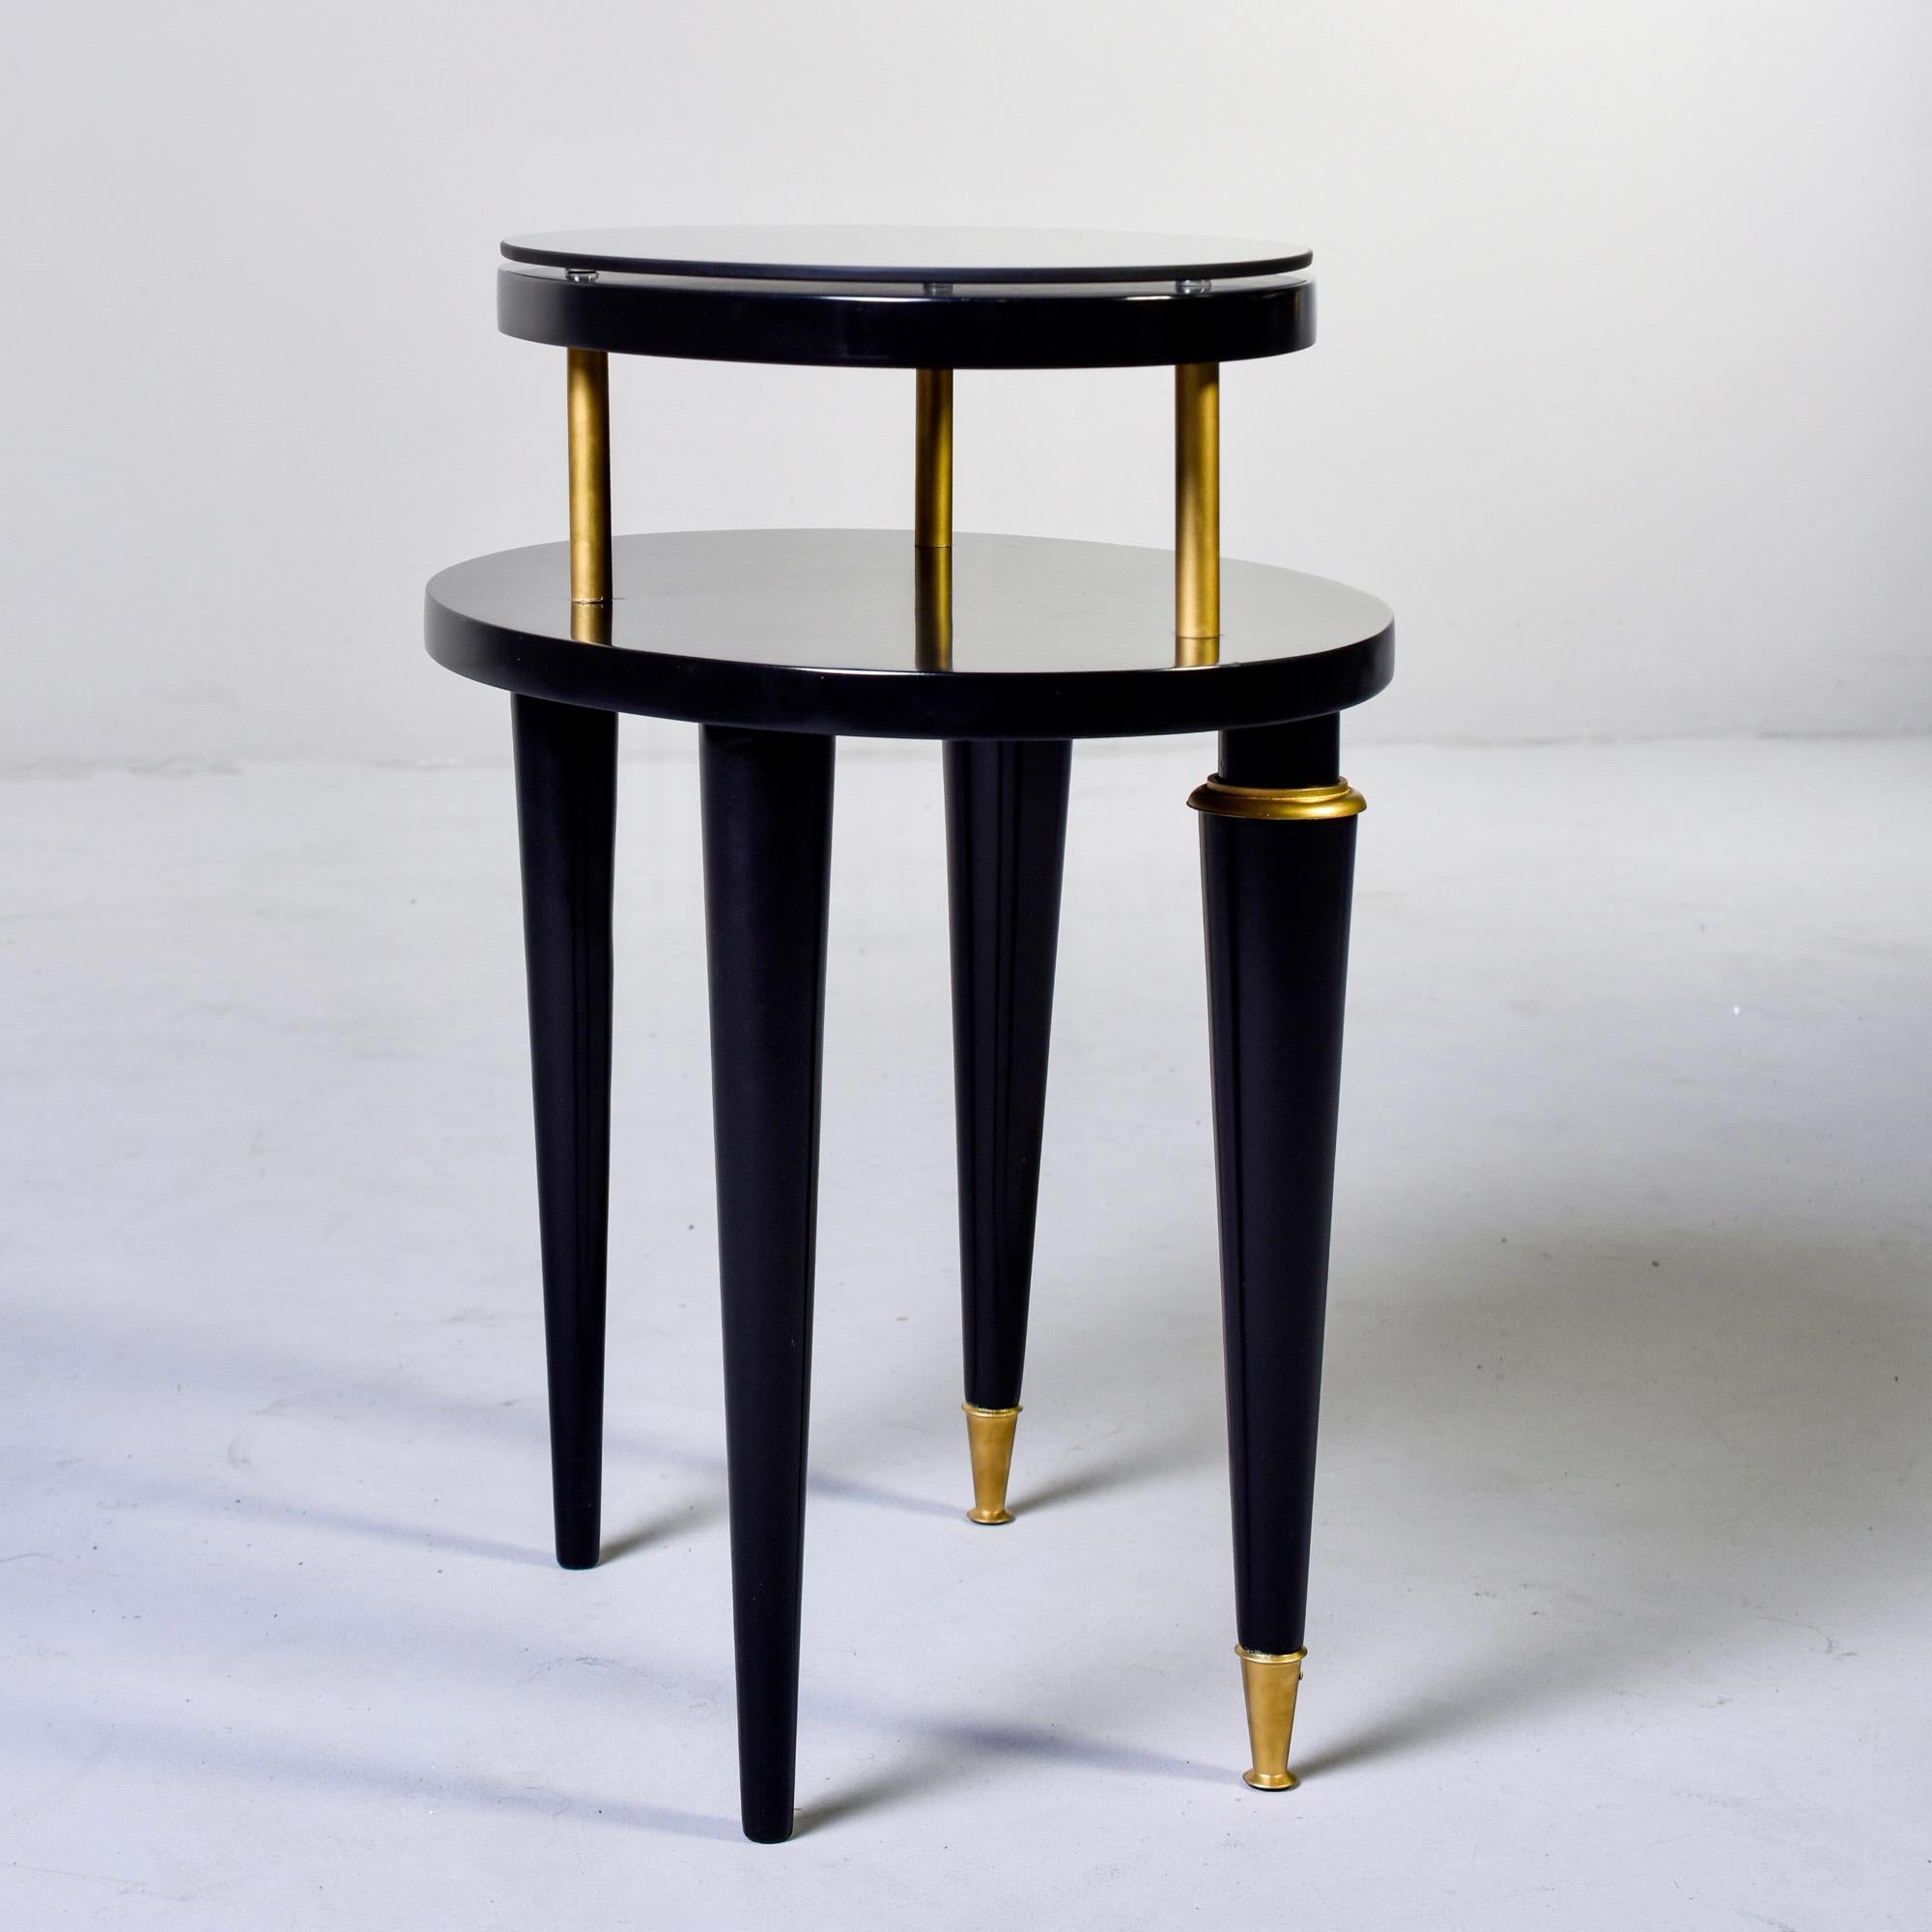 Painted French Art Deco Oval Ebonized Side Table with Brass Trim